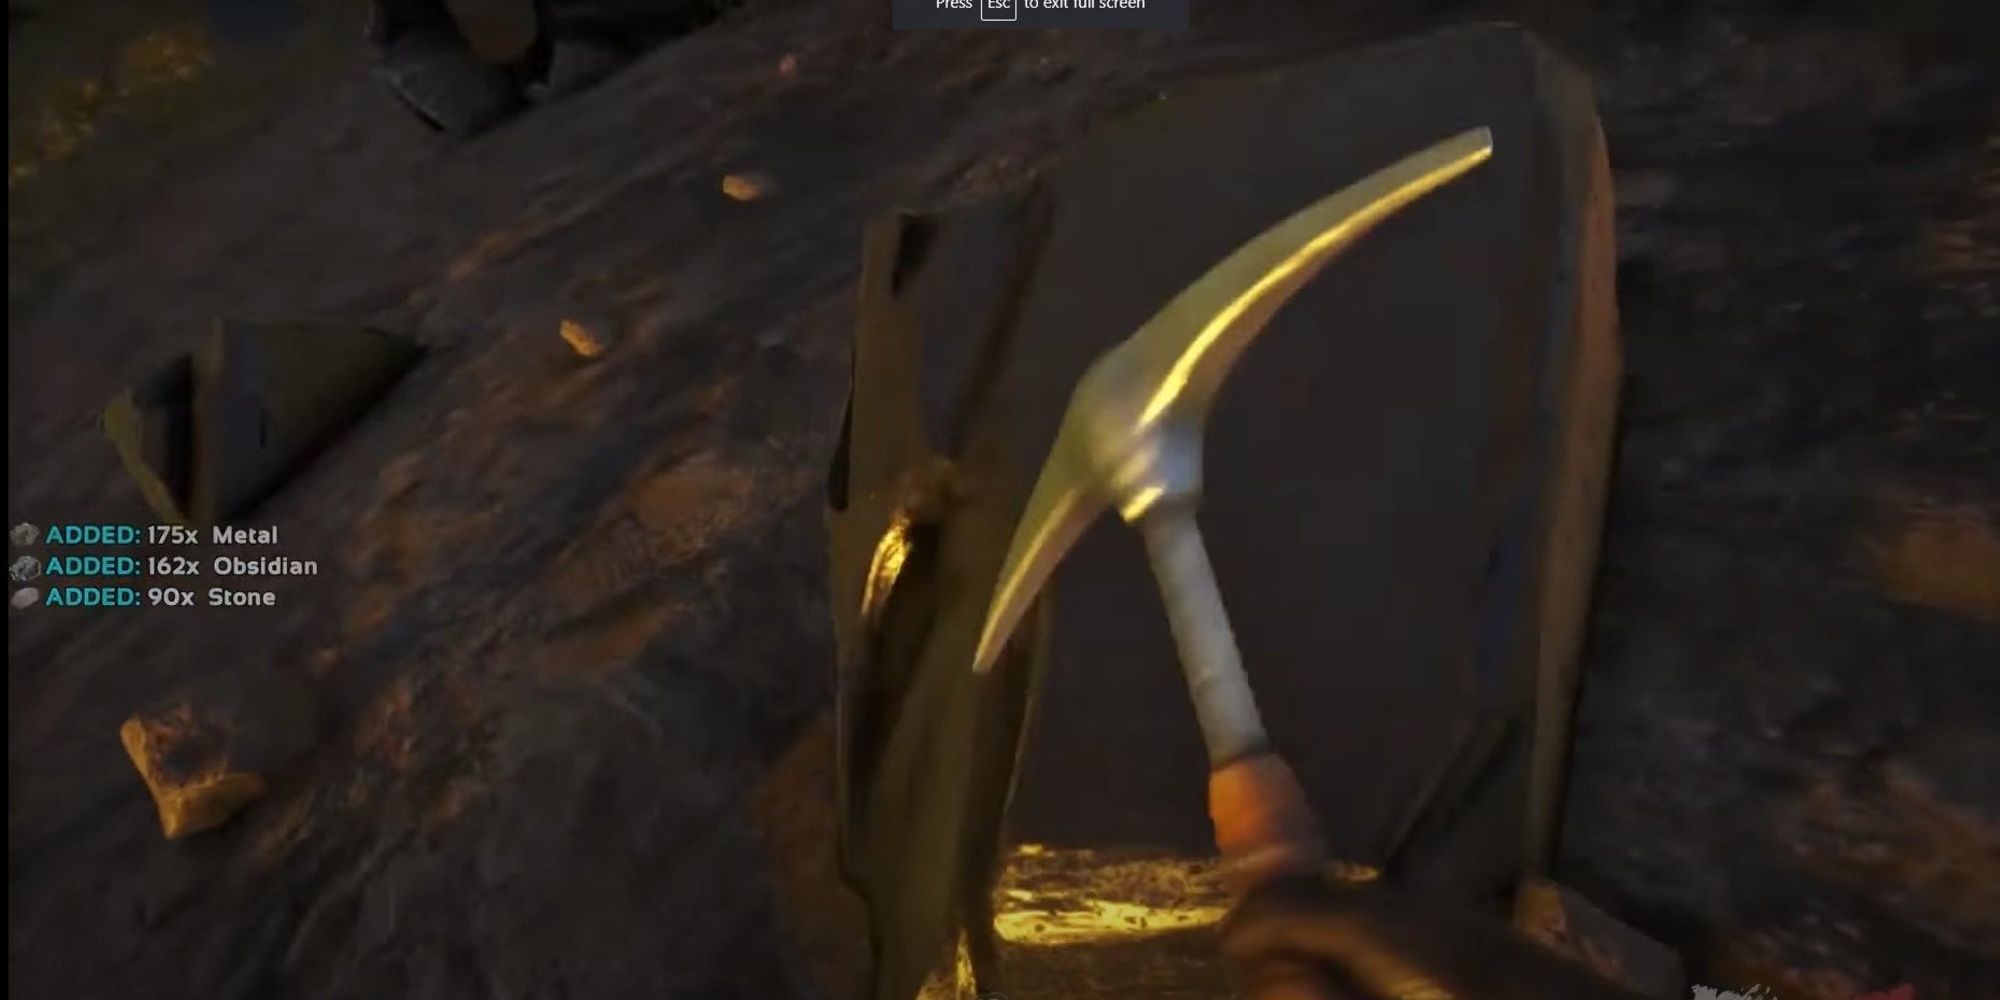 An Ark Survival Evolved character is using a pickaxe to find obsidian on The Island map.